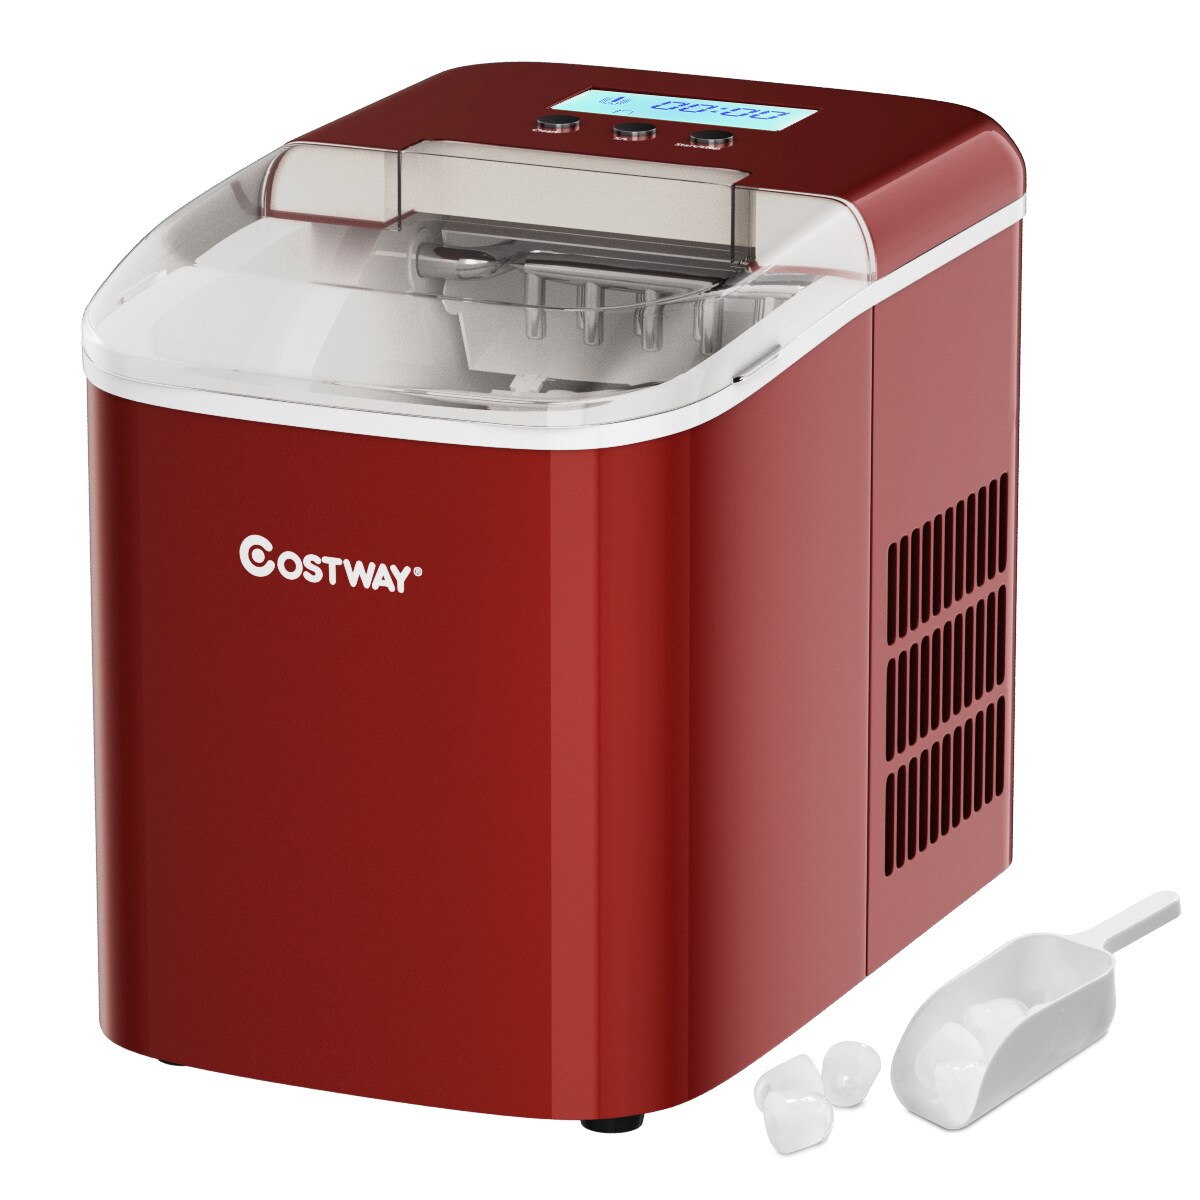 Costway Portable Ice Maker Machine Countertop 26LBS/24H LCD Display w/ Ice Scoop Red\Black\Green\Silver